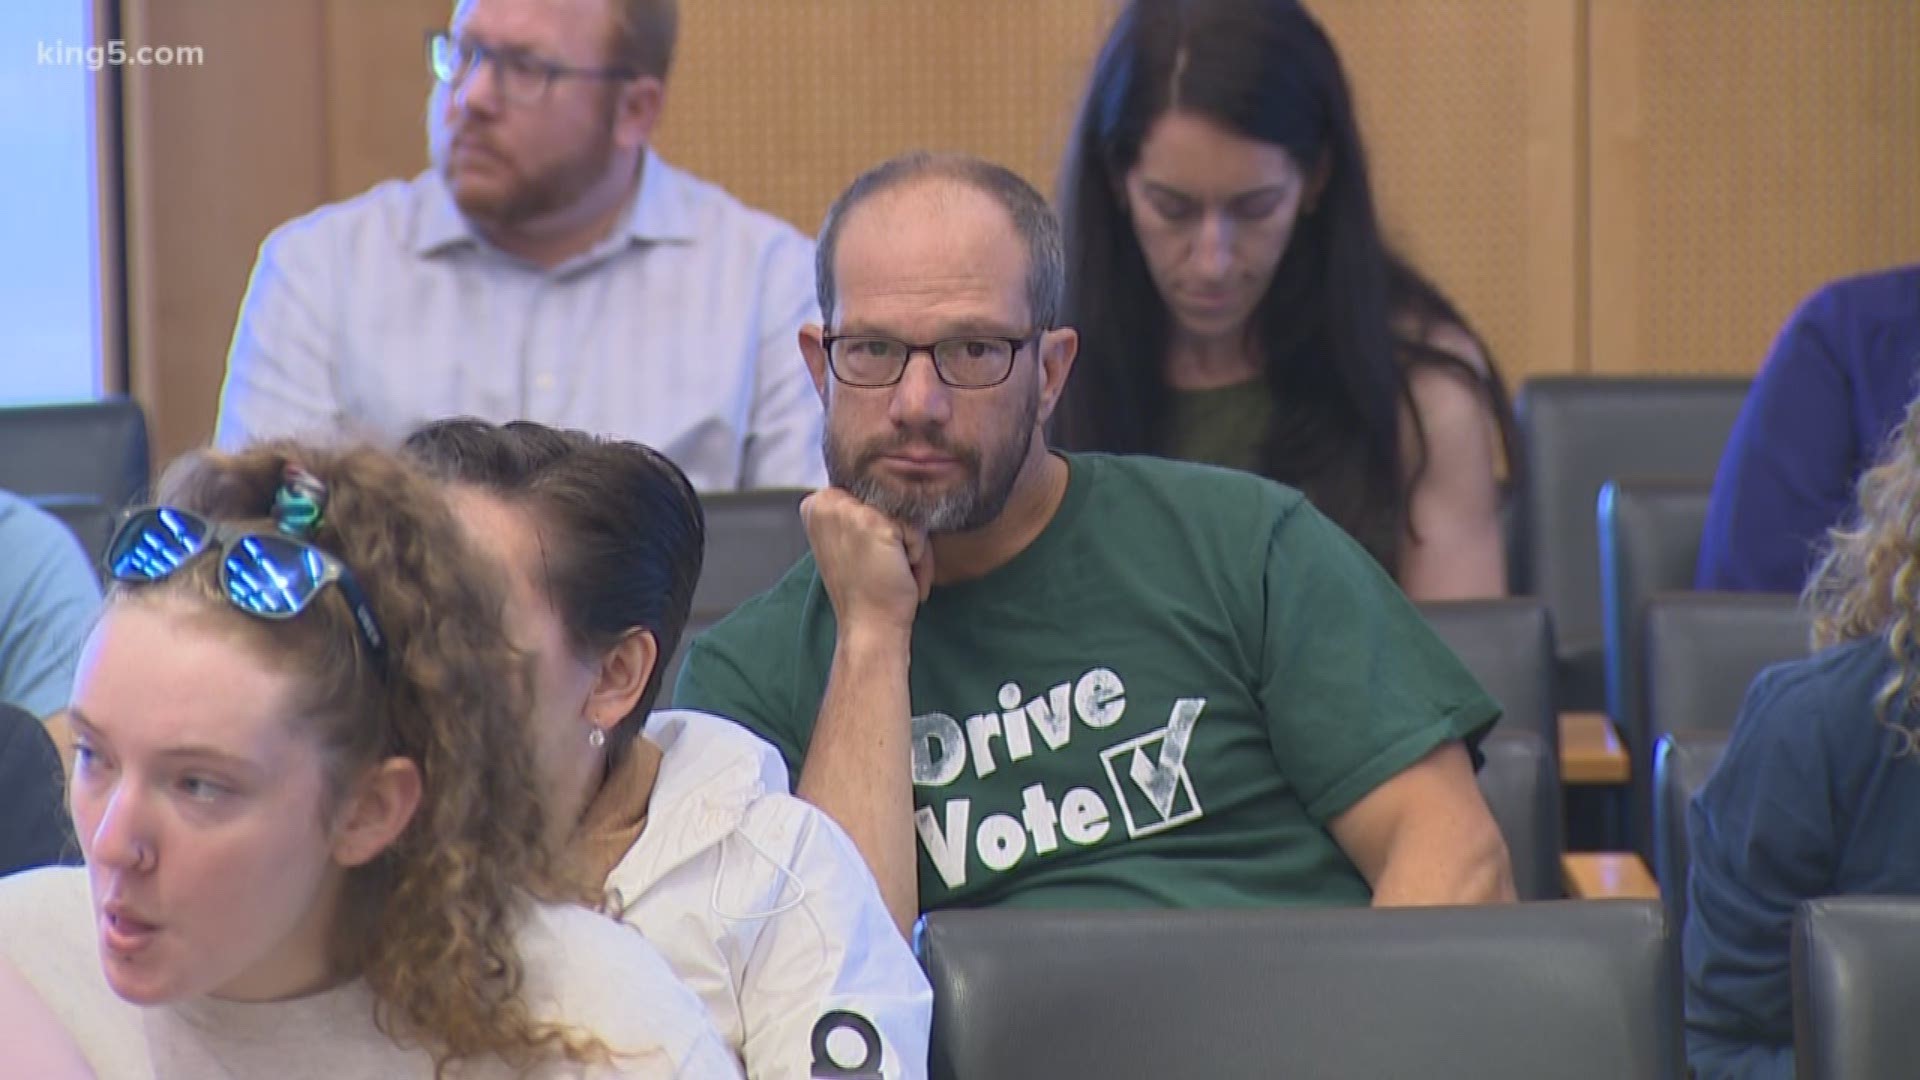 The Seattle City Council has begun discussions on whether to regulate the businesses who rely on independent contractors, like Uber, Lyft, and food delivery services.